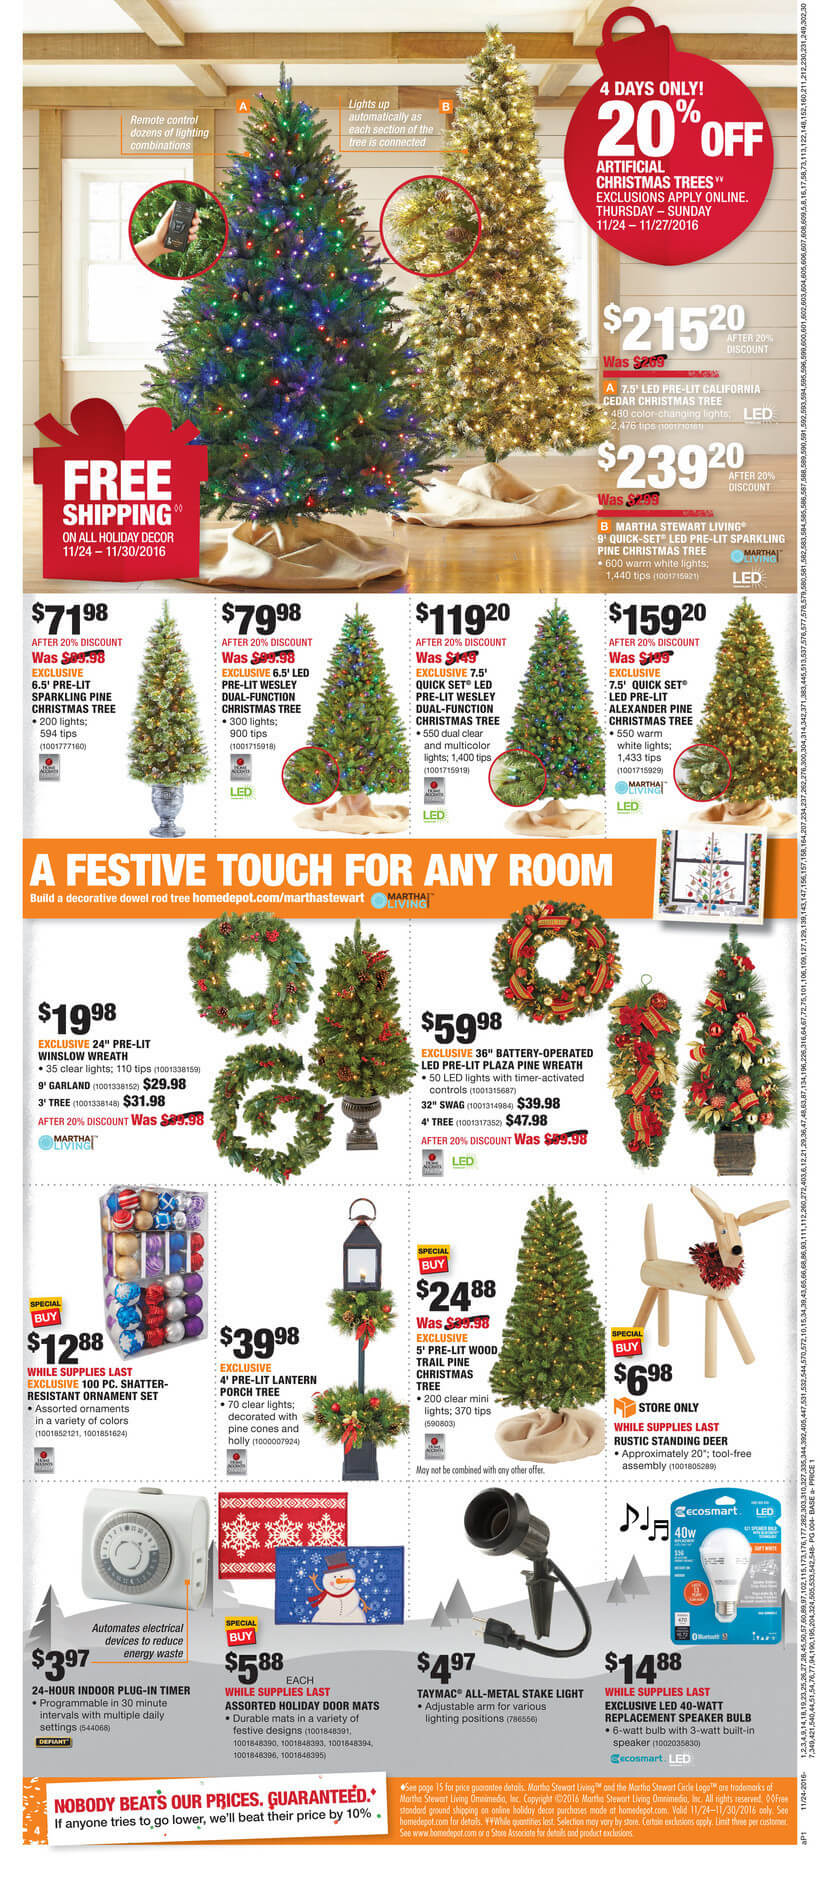 Home Depot Black Friday 2016 Ad - Page 4